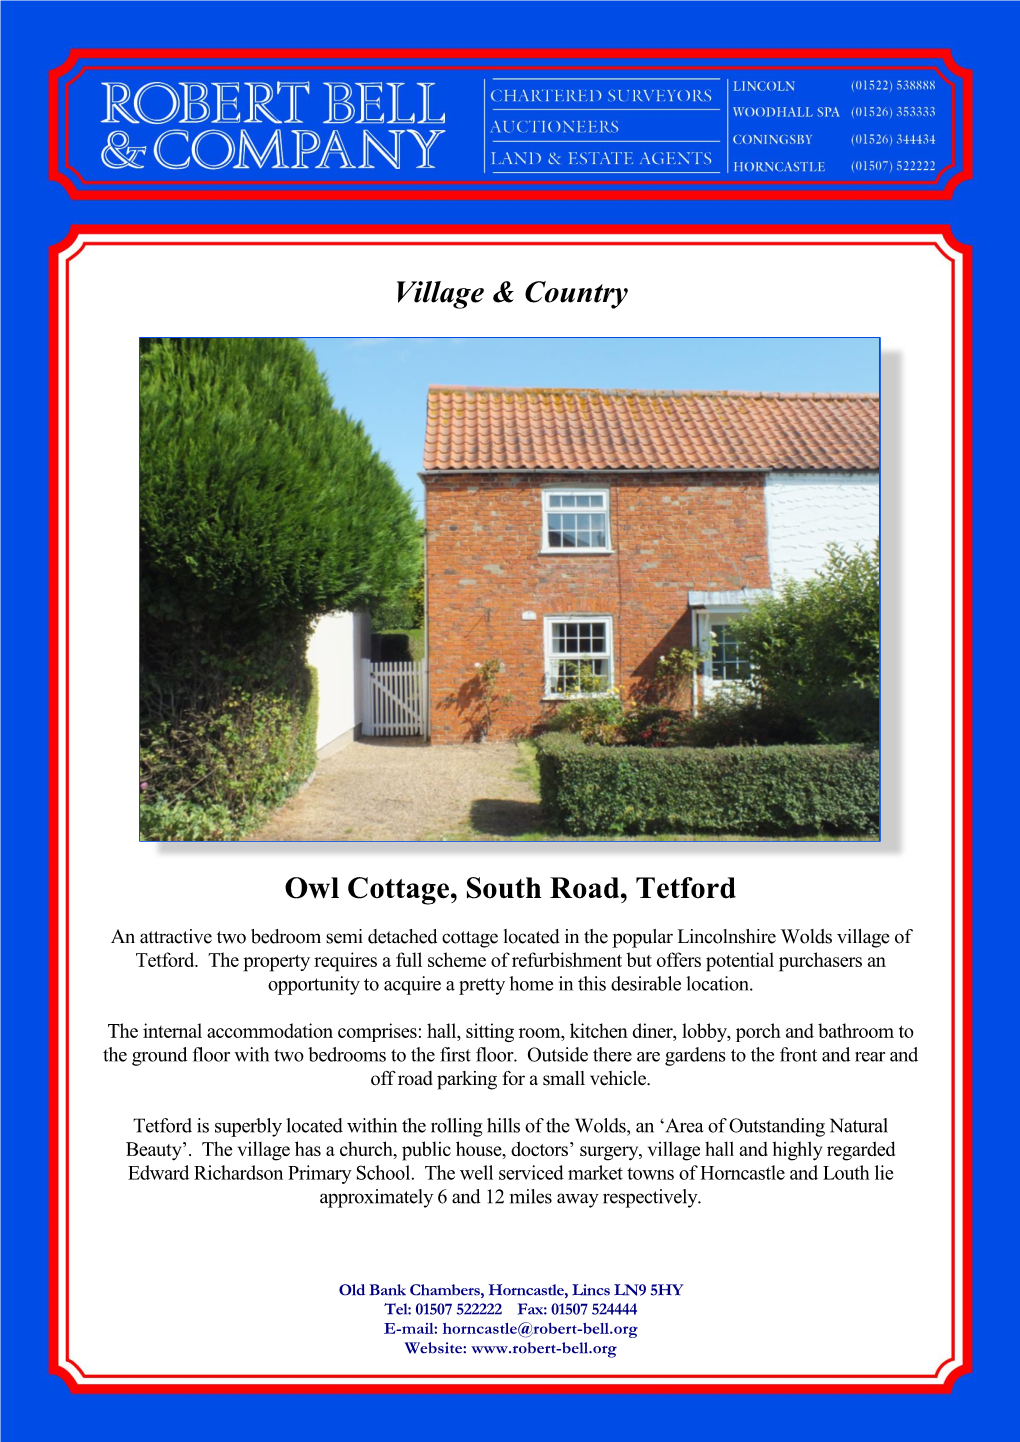 Village & Country Owl Cottage, South Road, Tetford